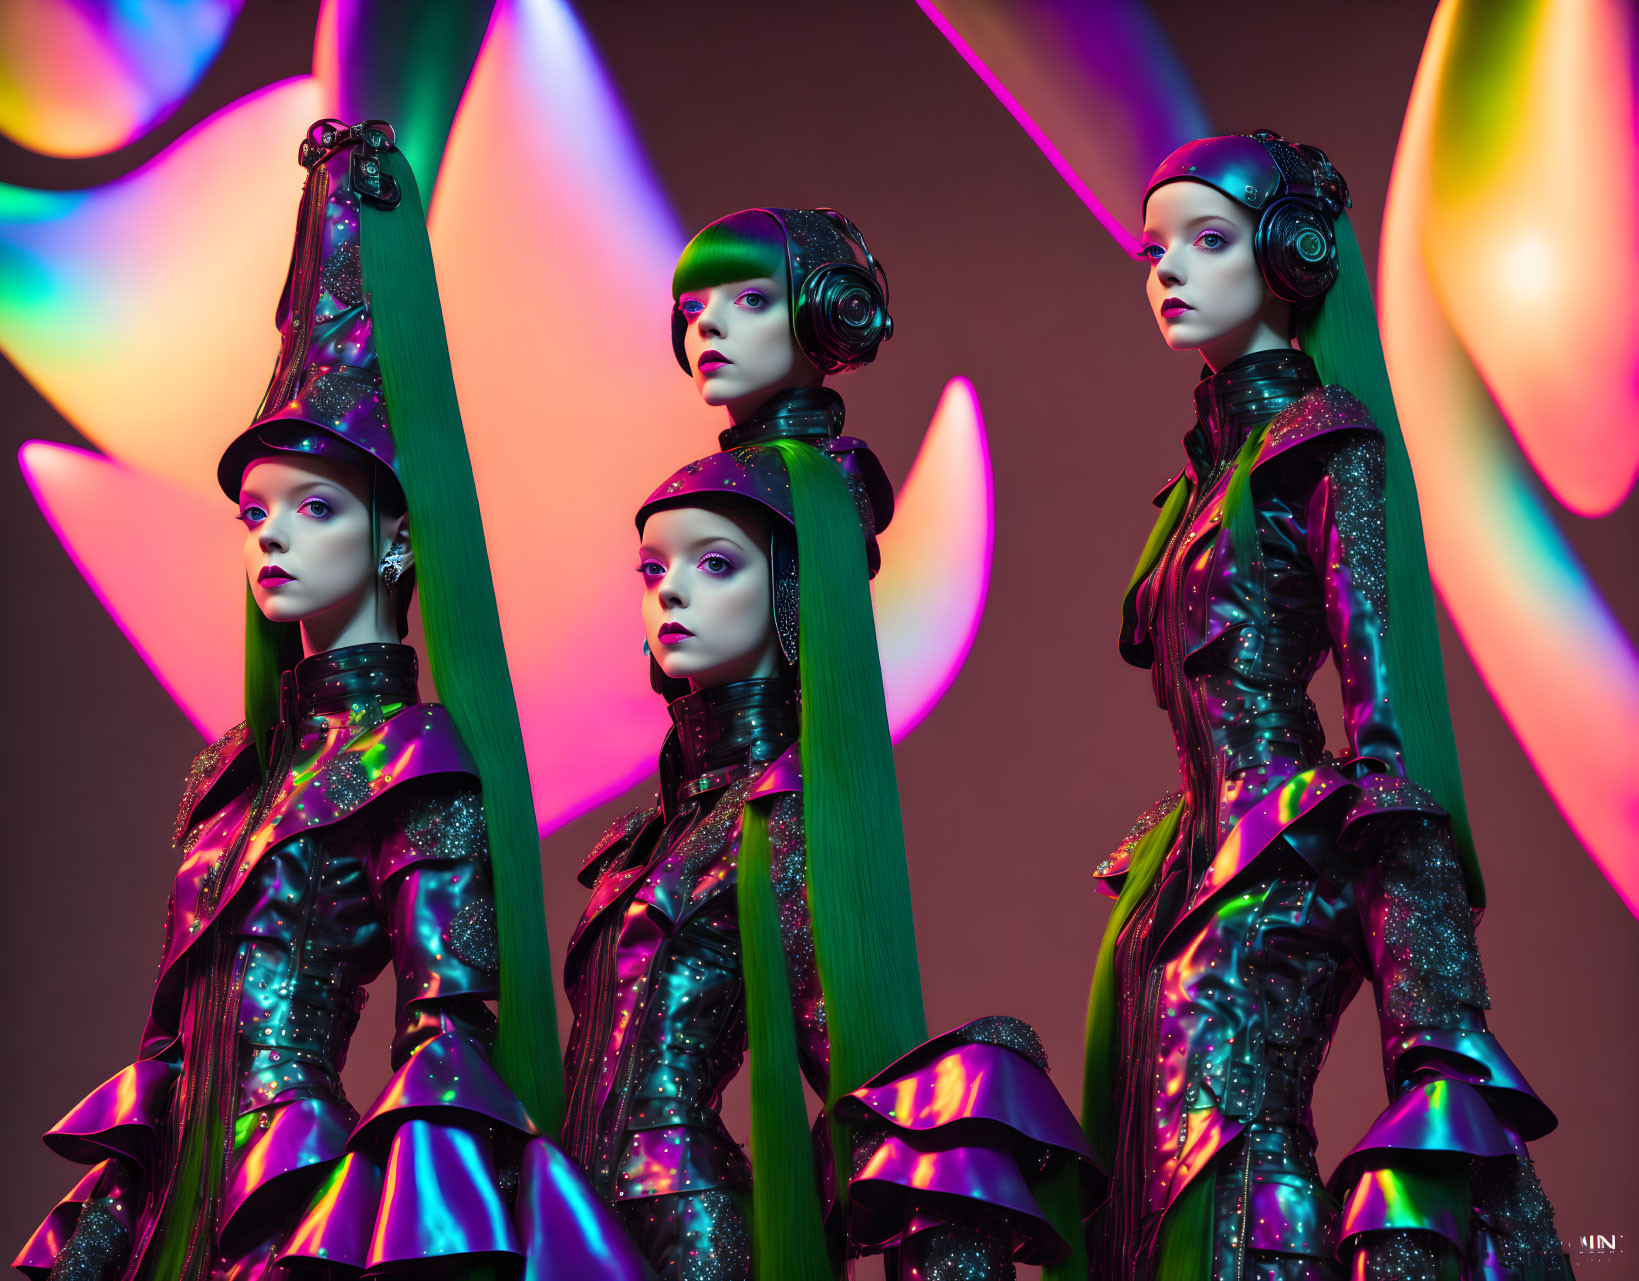 Four futuristic-styled models in colorful sci-fi outfits against dynamic backdrop